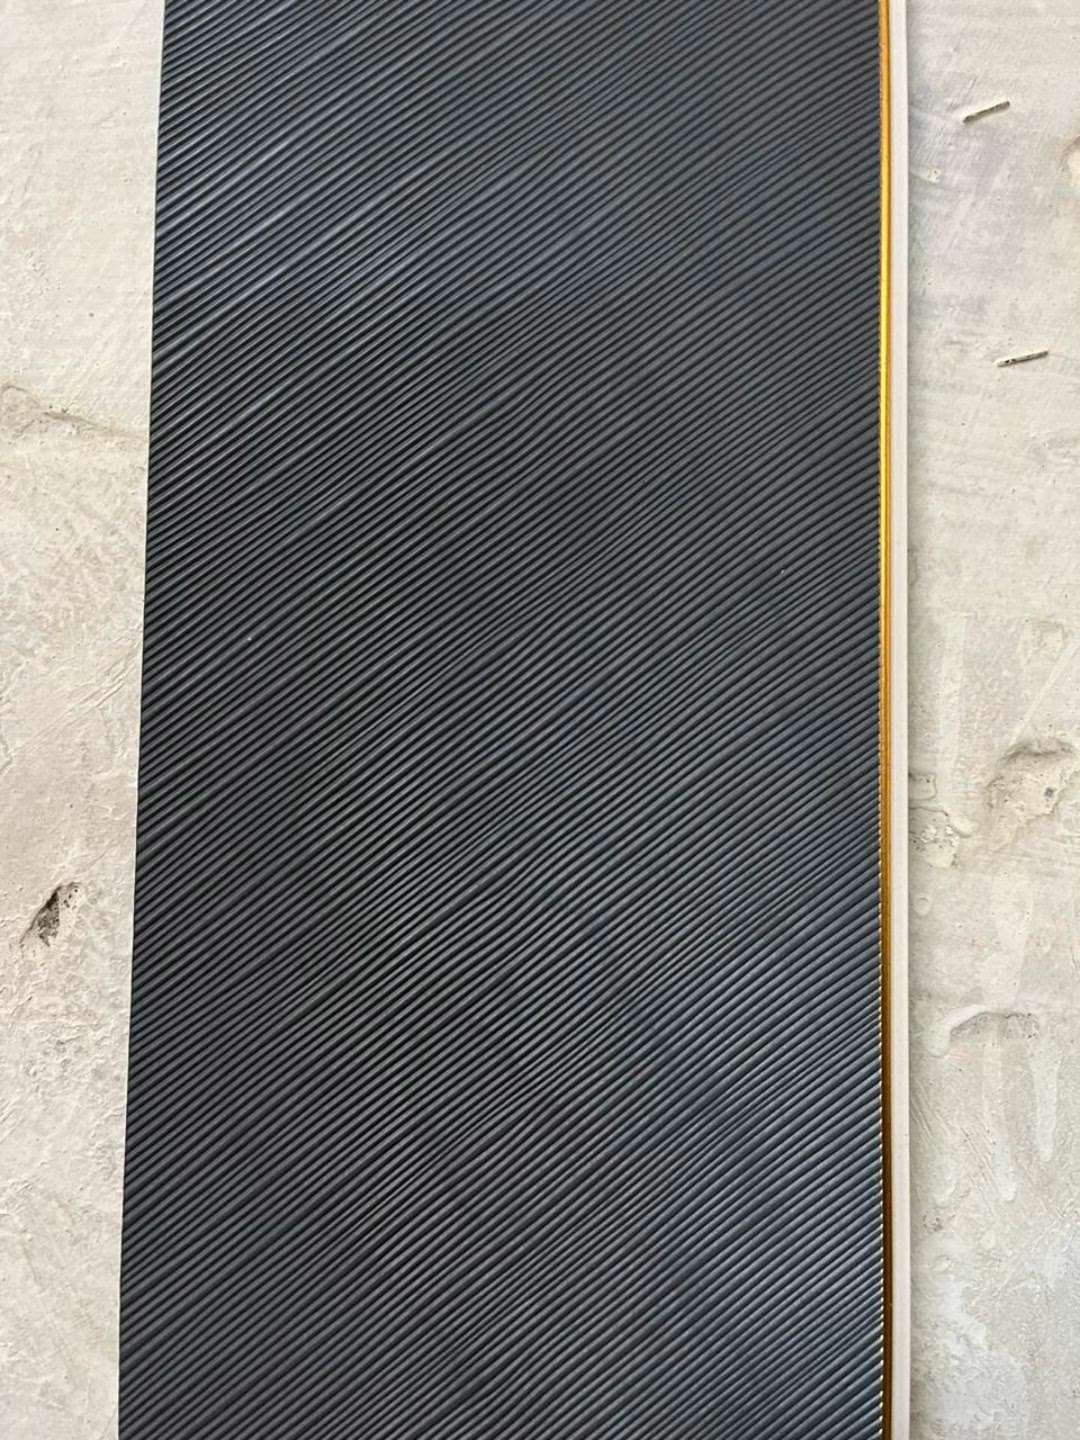 charcoal panels 
available at wholesale Price 
 #InteriorDesigner  #Architect